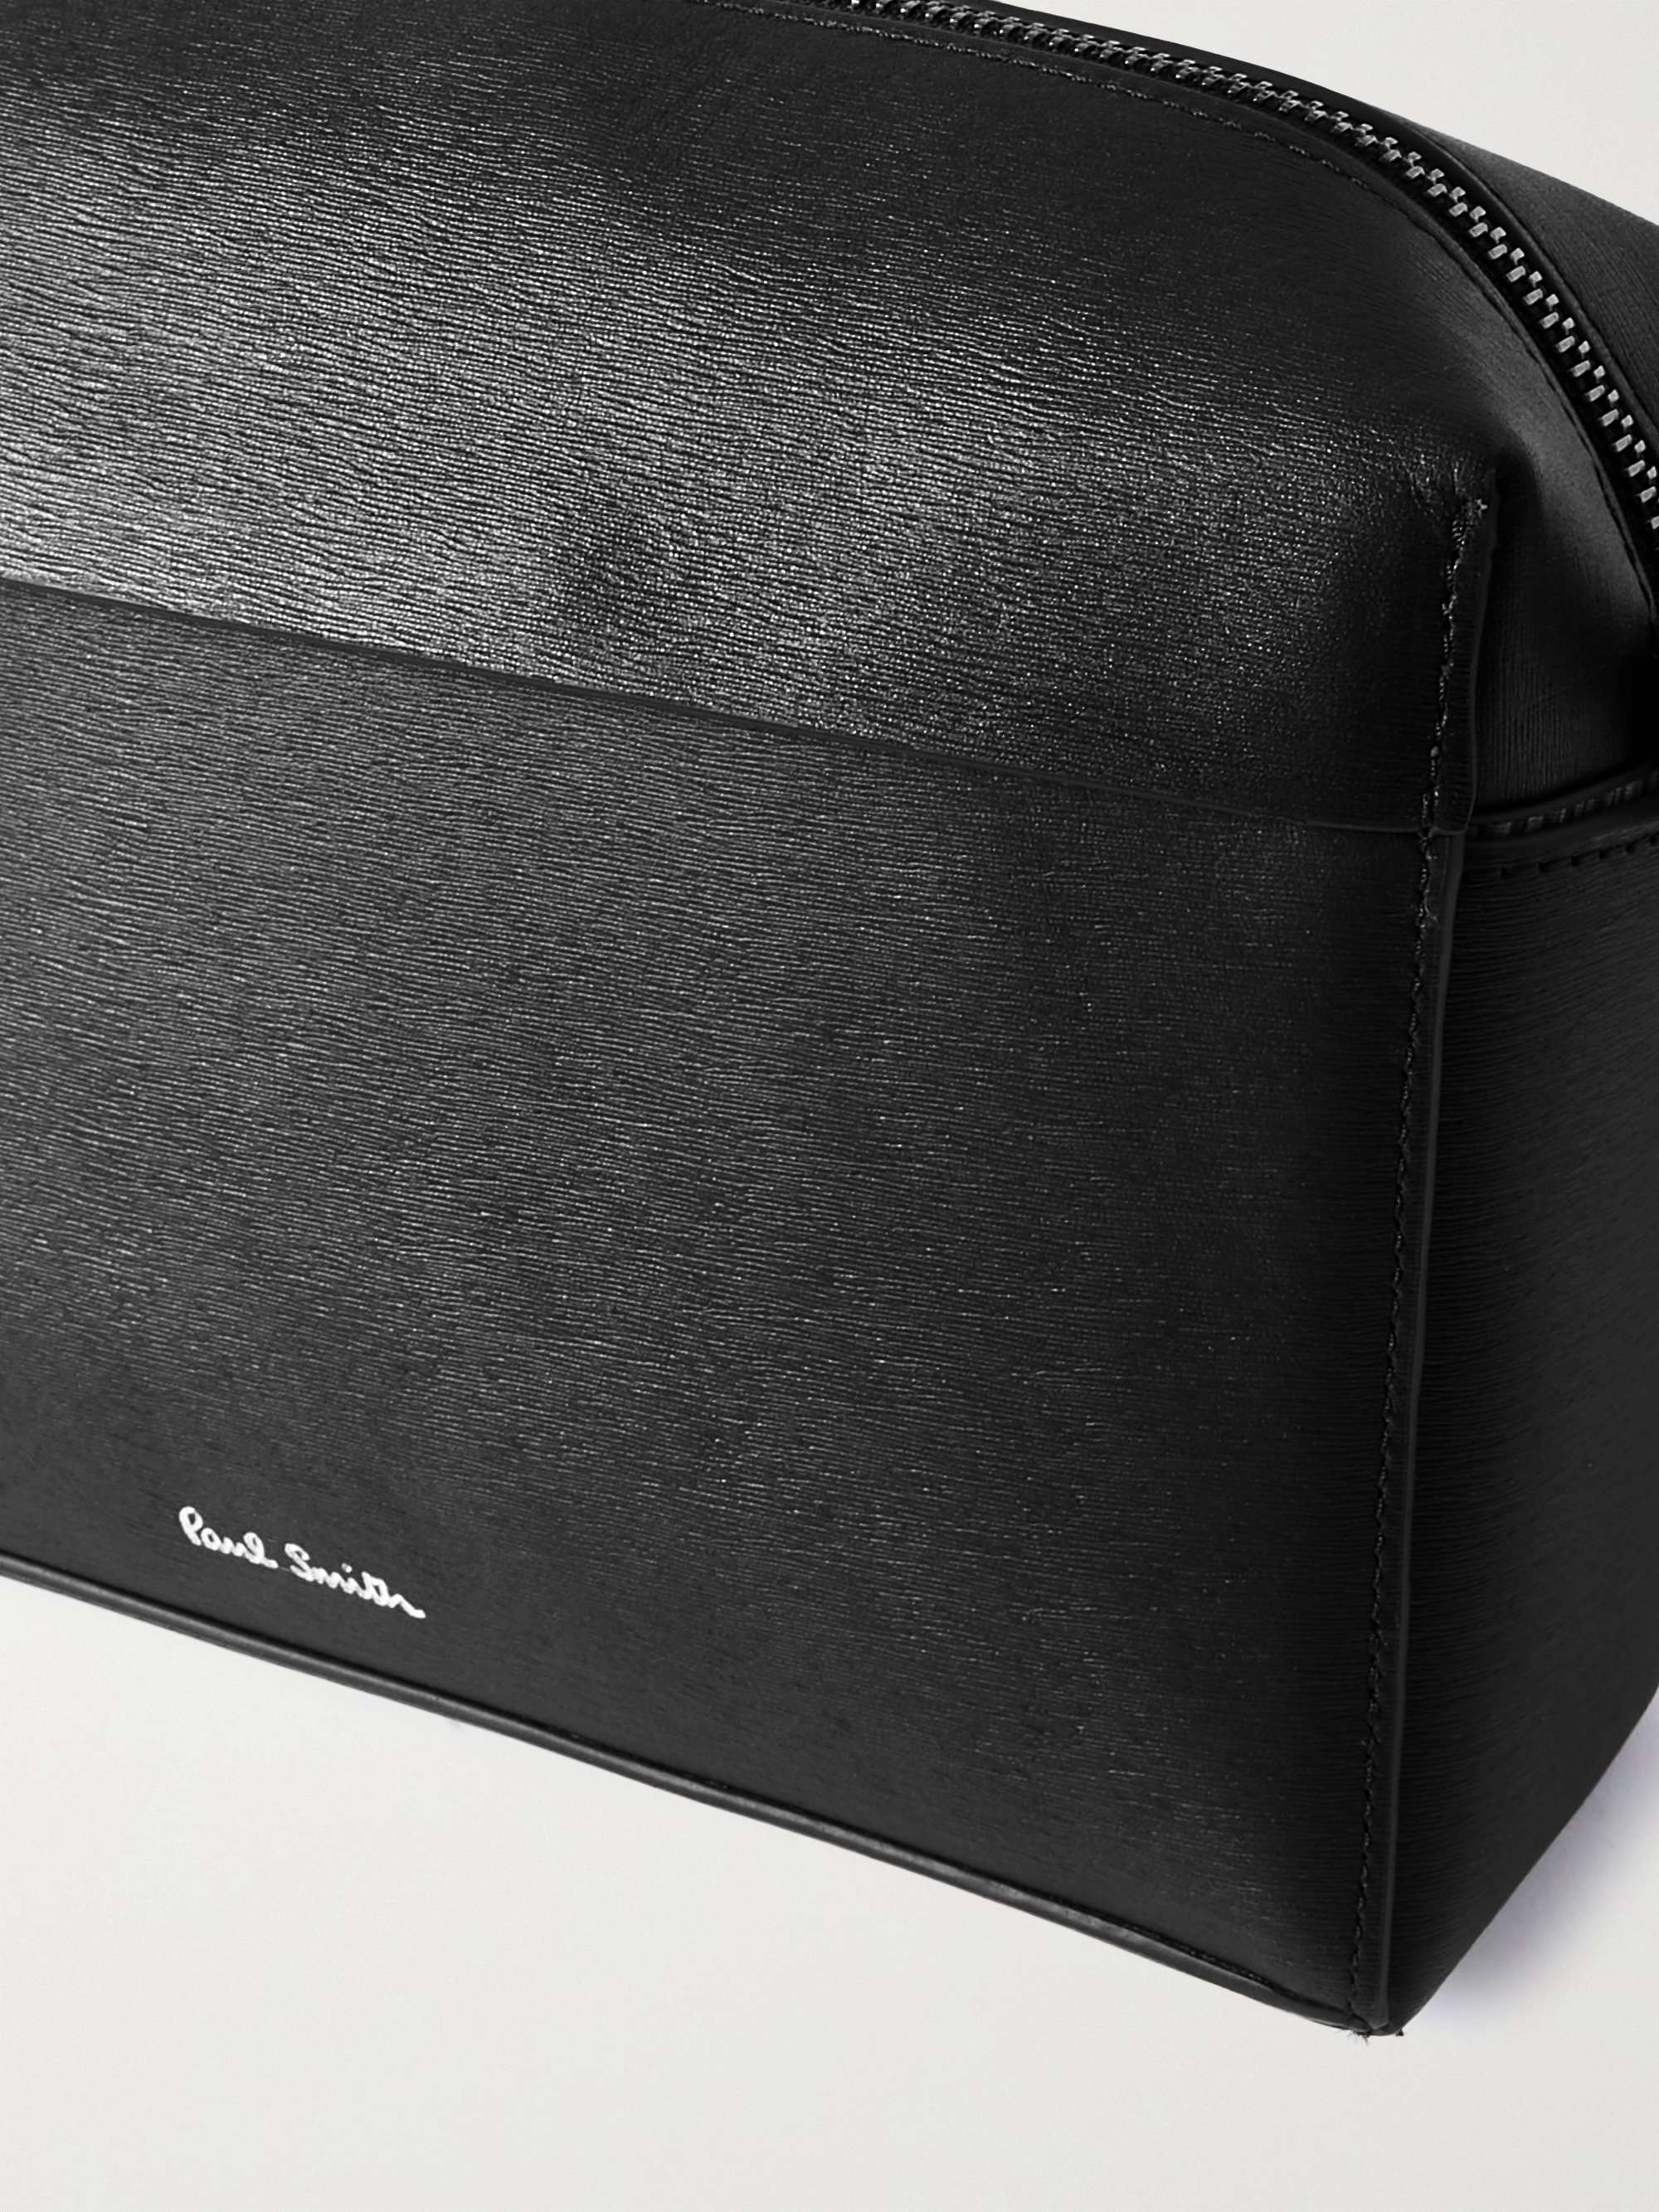 PAUL SMITH Embossed Textured-Leather Messenger Bag